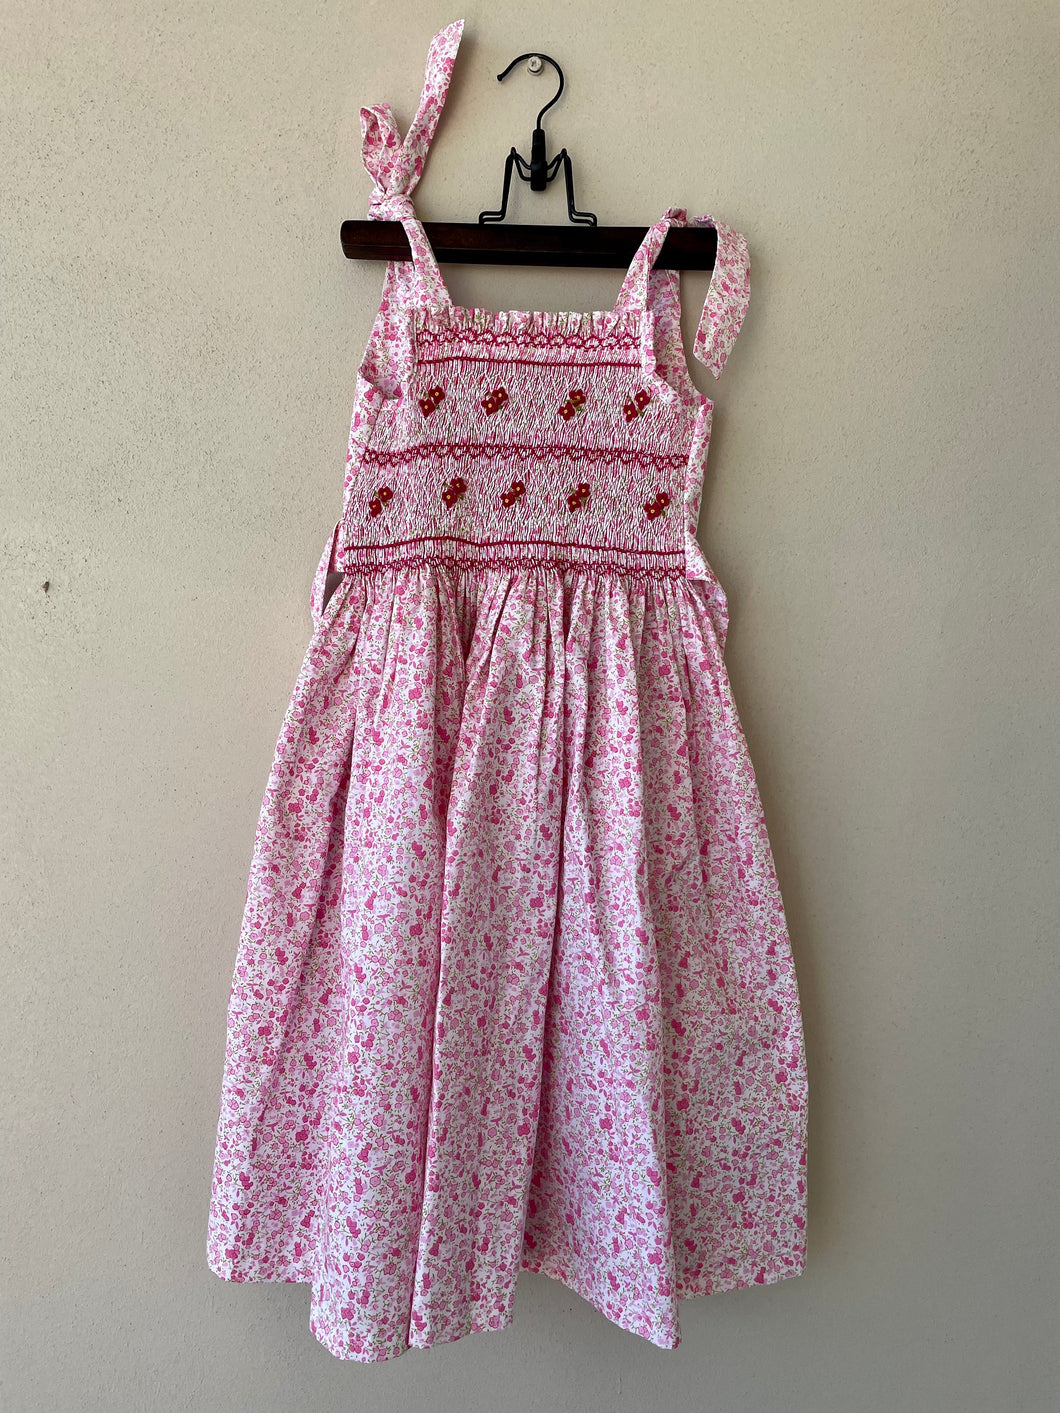 Pink Floral Hand-smocked summer dress #8 years